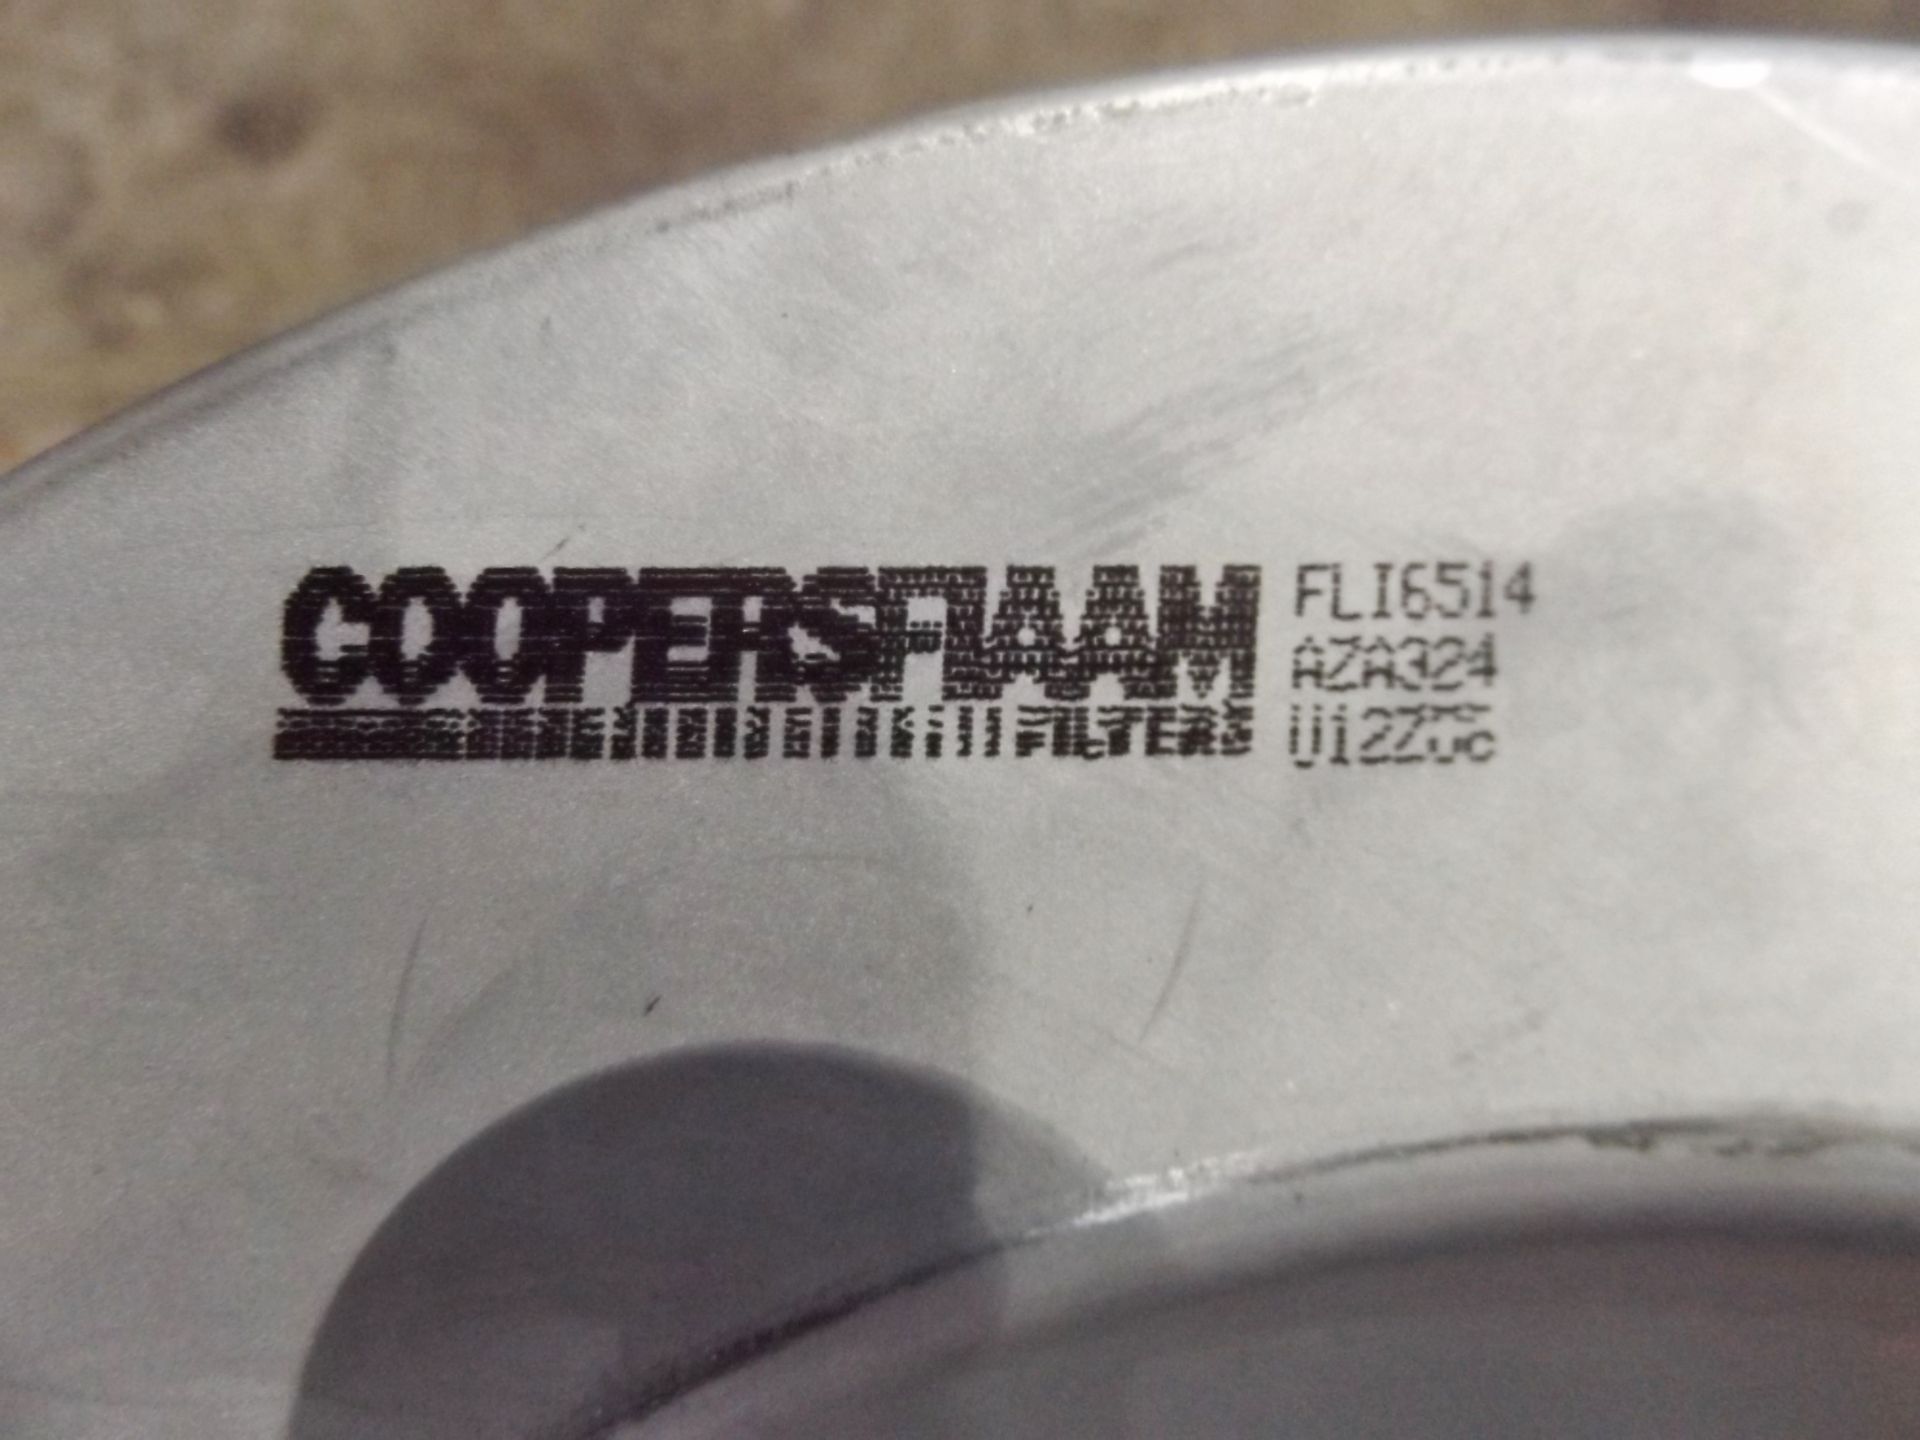 10 x Coopers FIAAM AZA324 Air Filters - Image 3 of 5